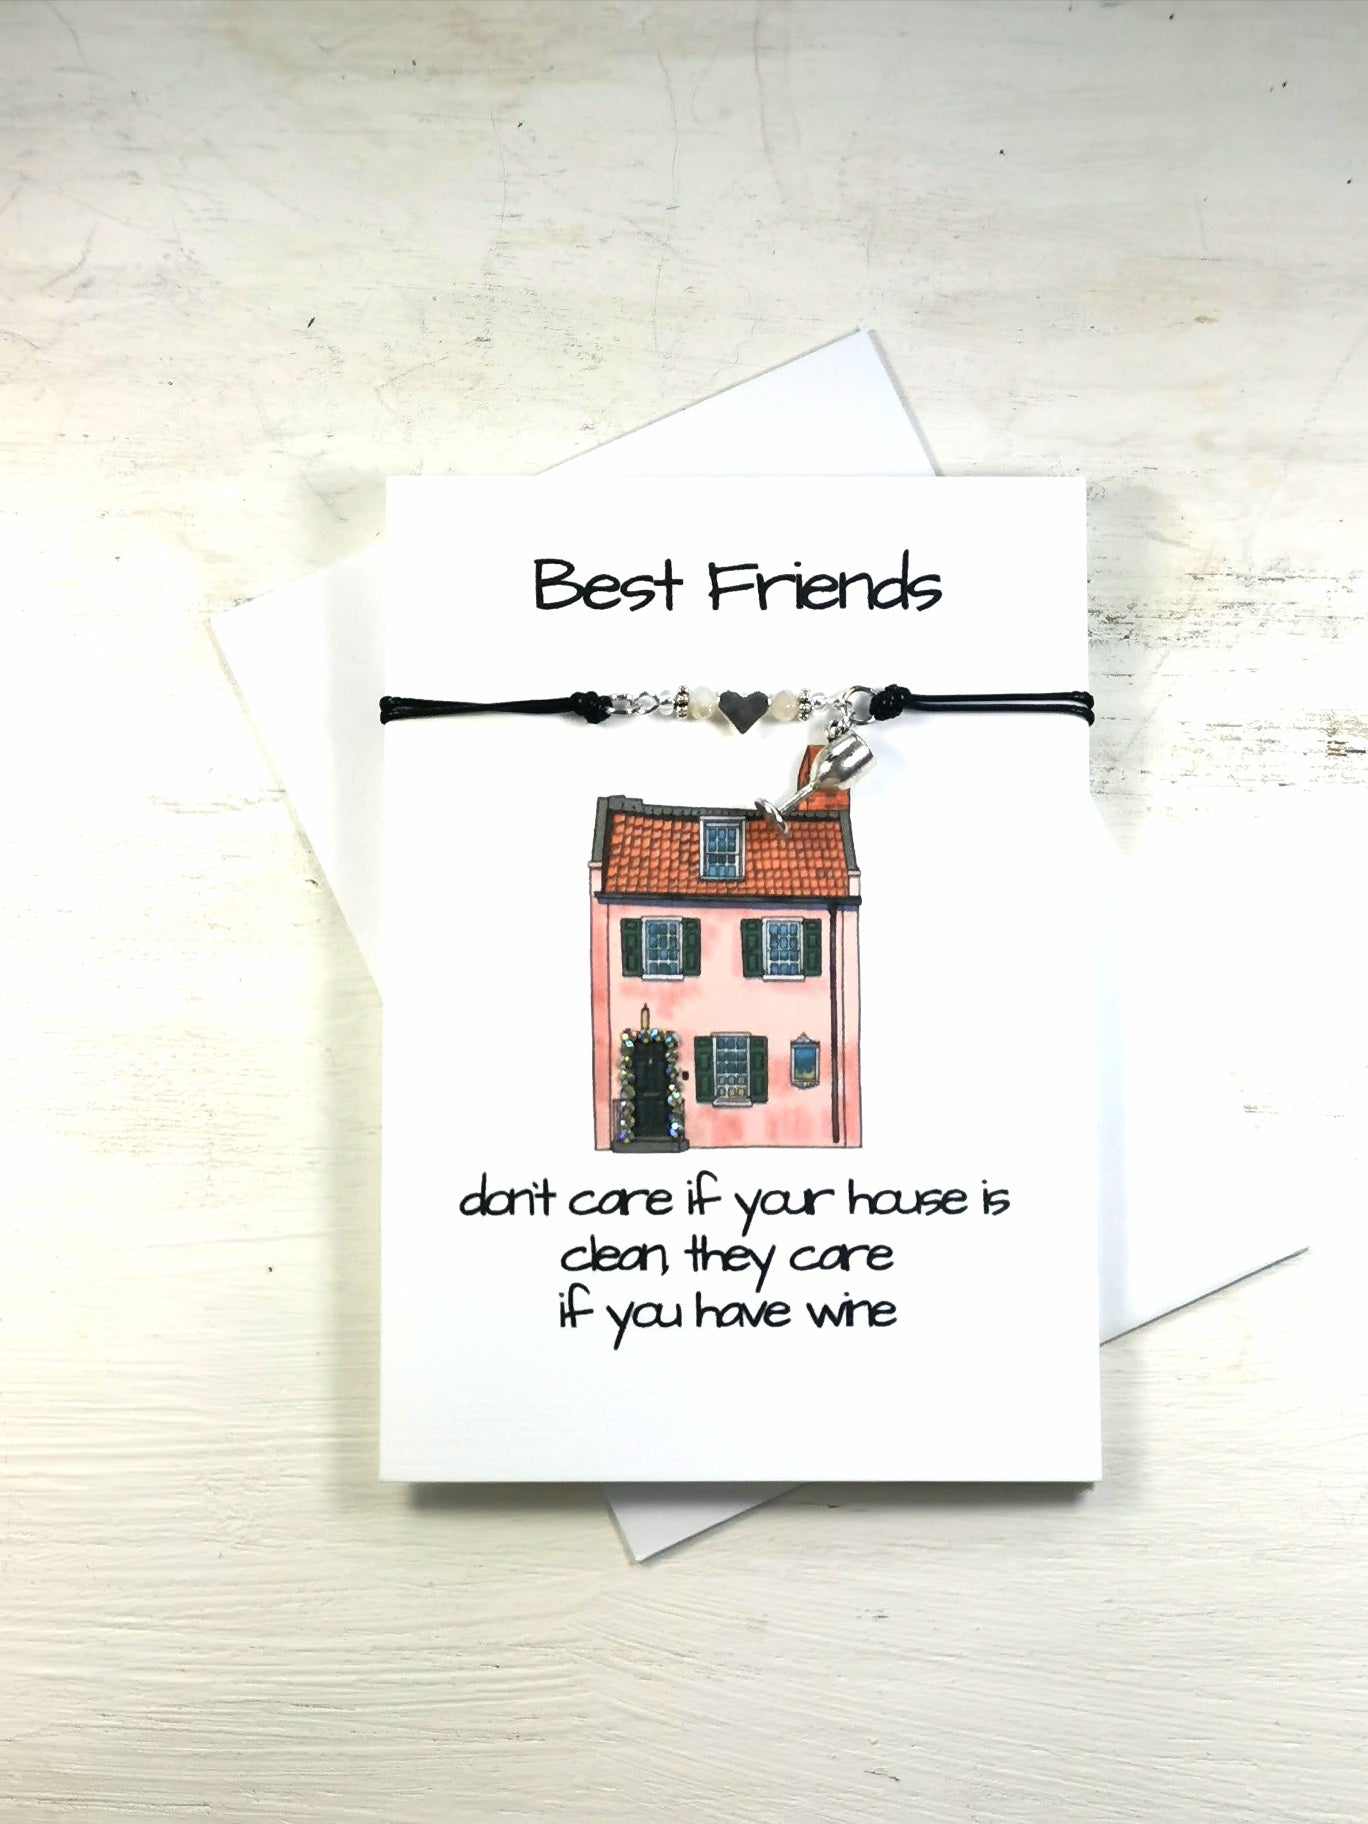 Best Friends Don`t Care if you house is clean Bracelet Gift Card